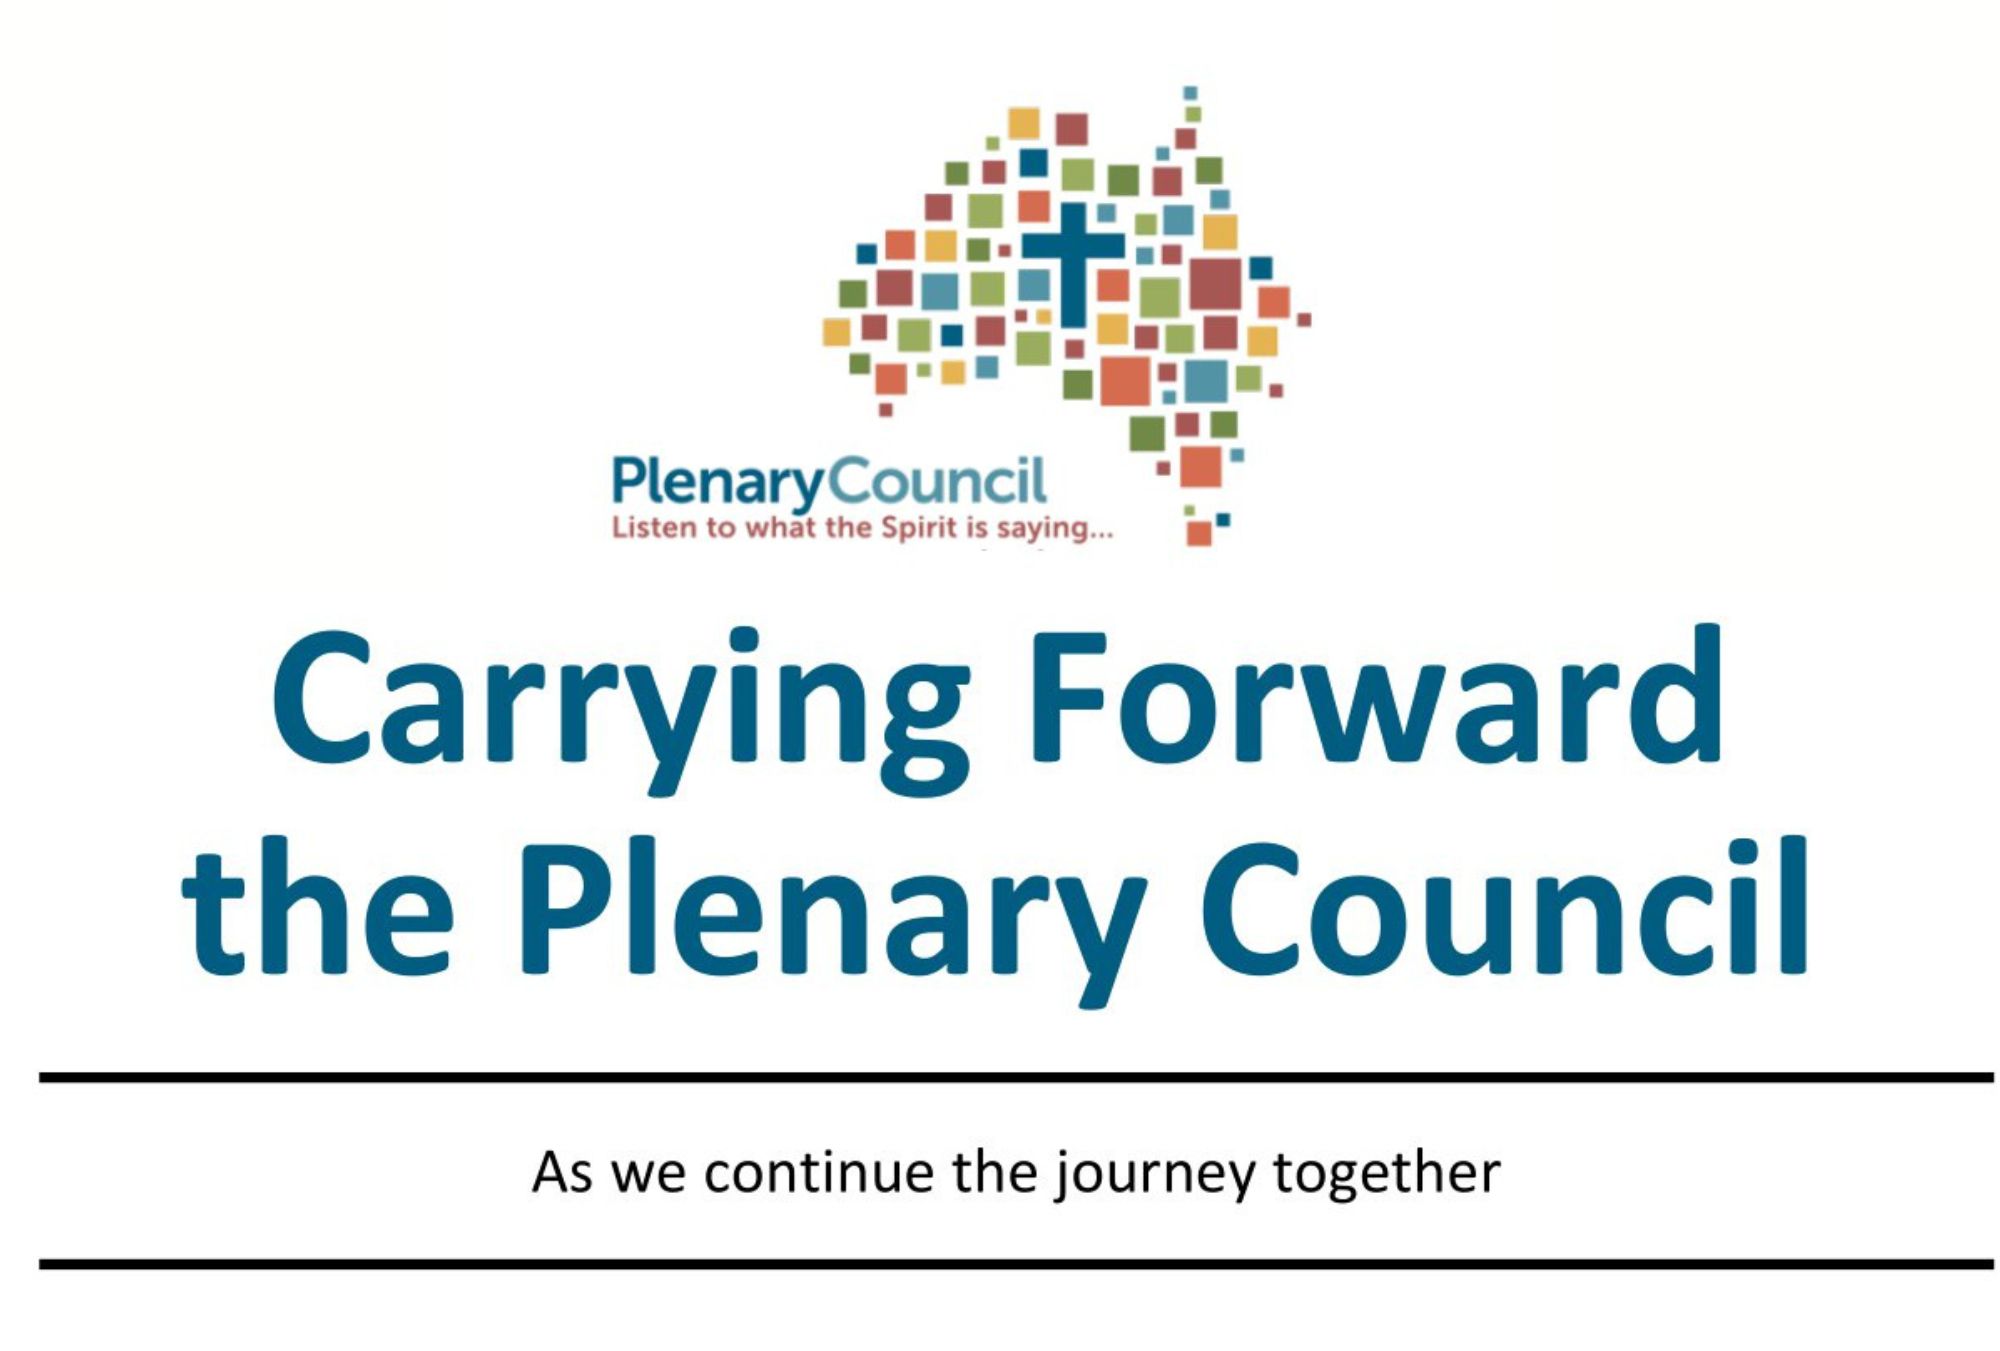 Carrying Forward the Plenary Council